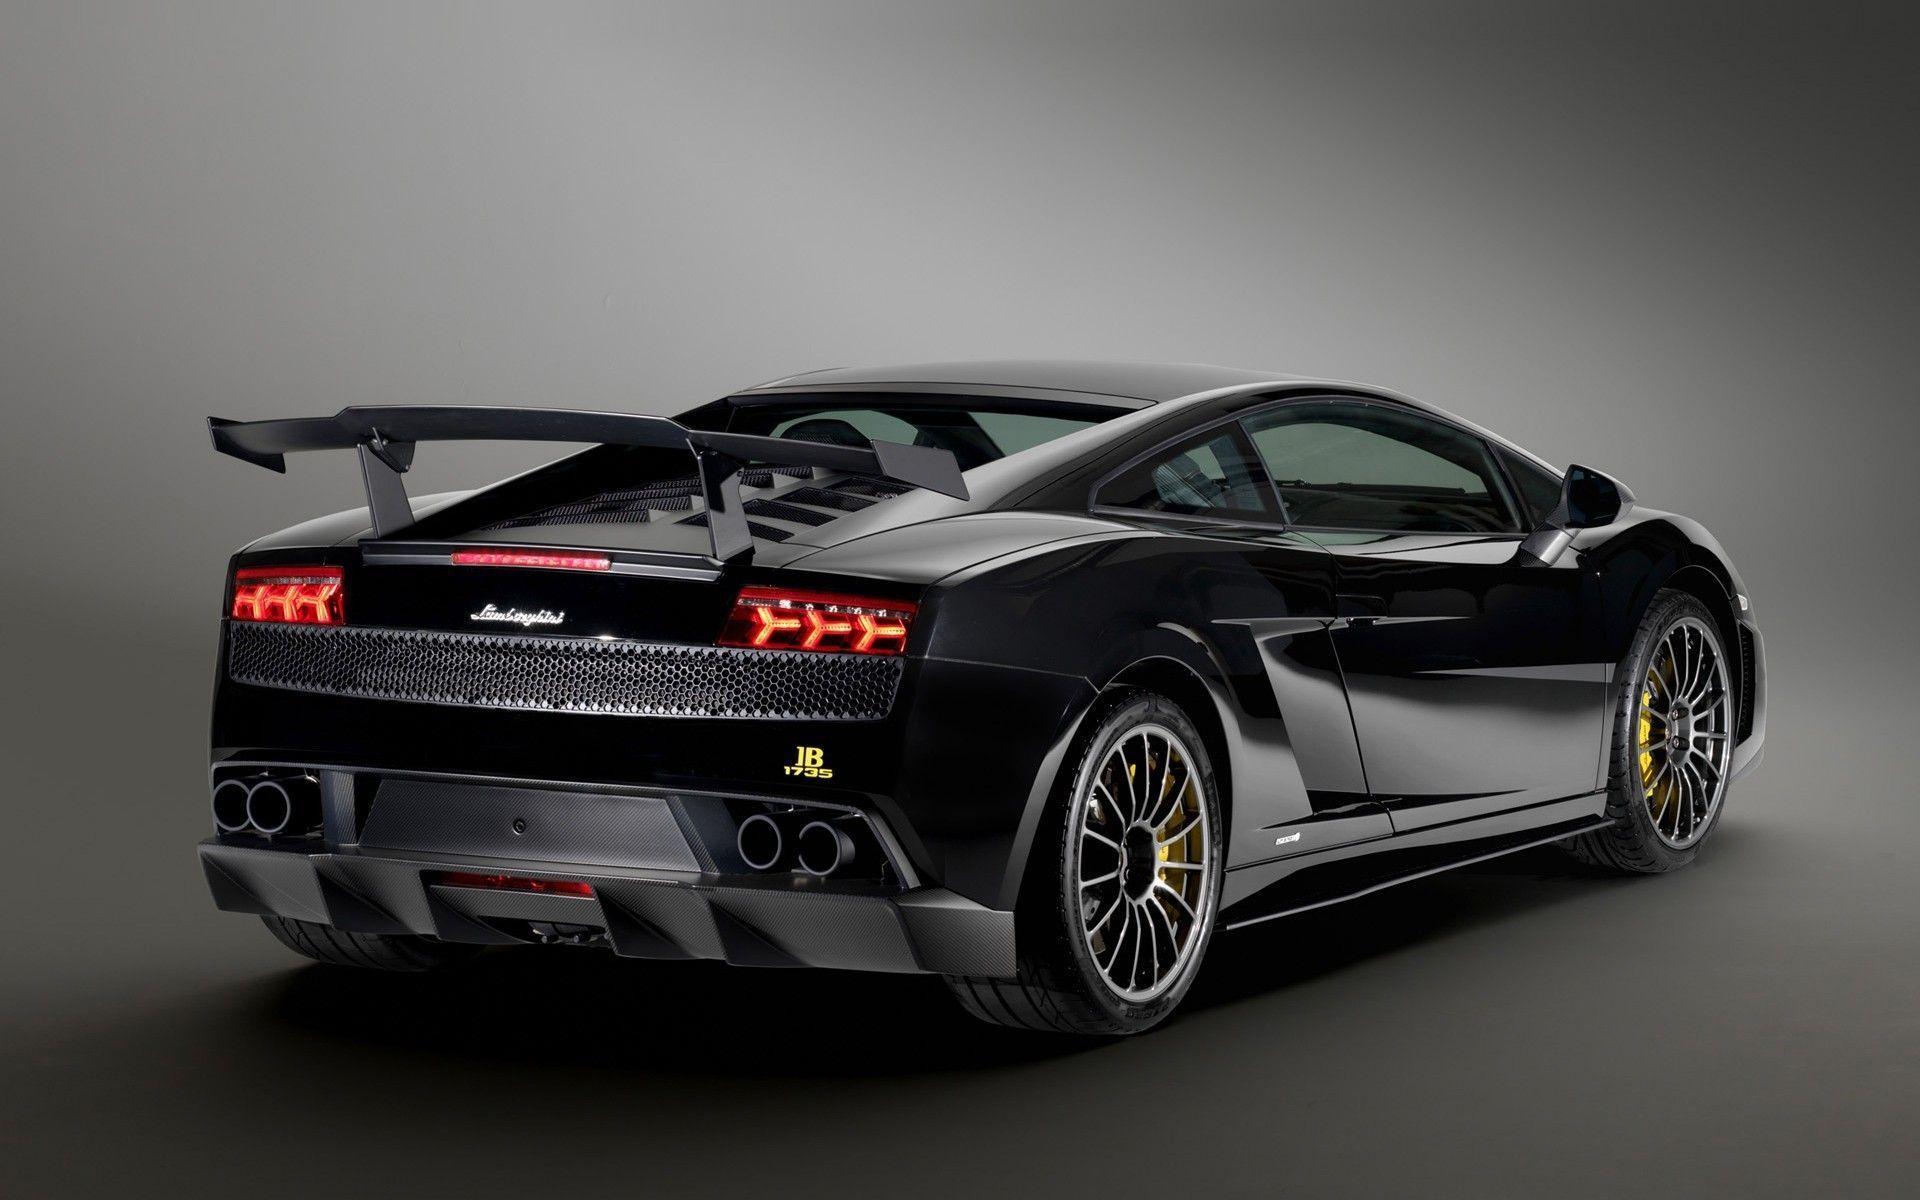 Download Exotic Cars 668 1920x1200 px High Resolution Wallpaper